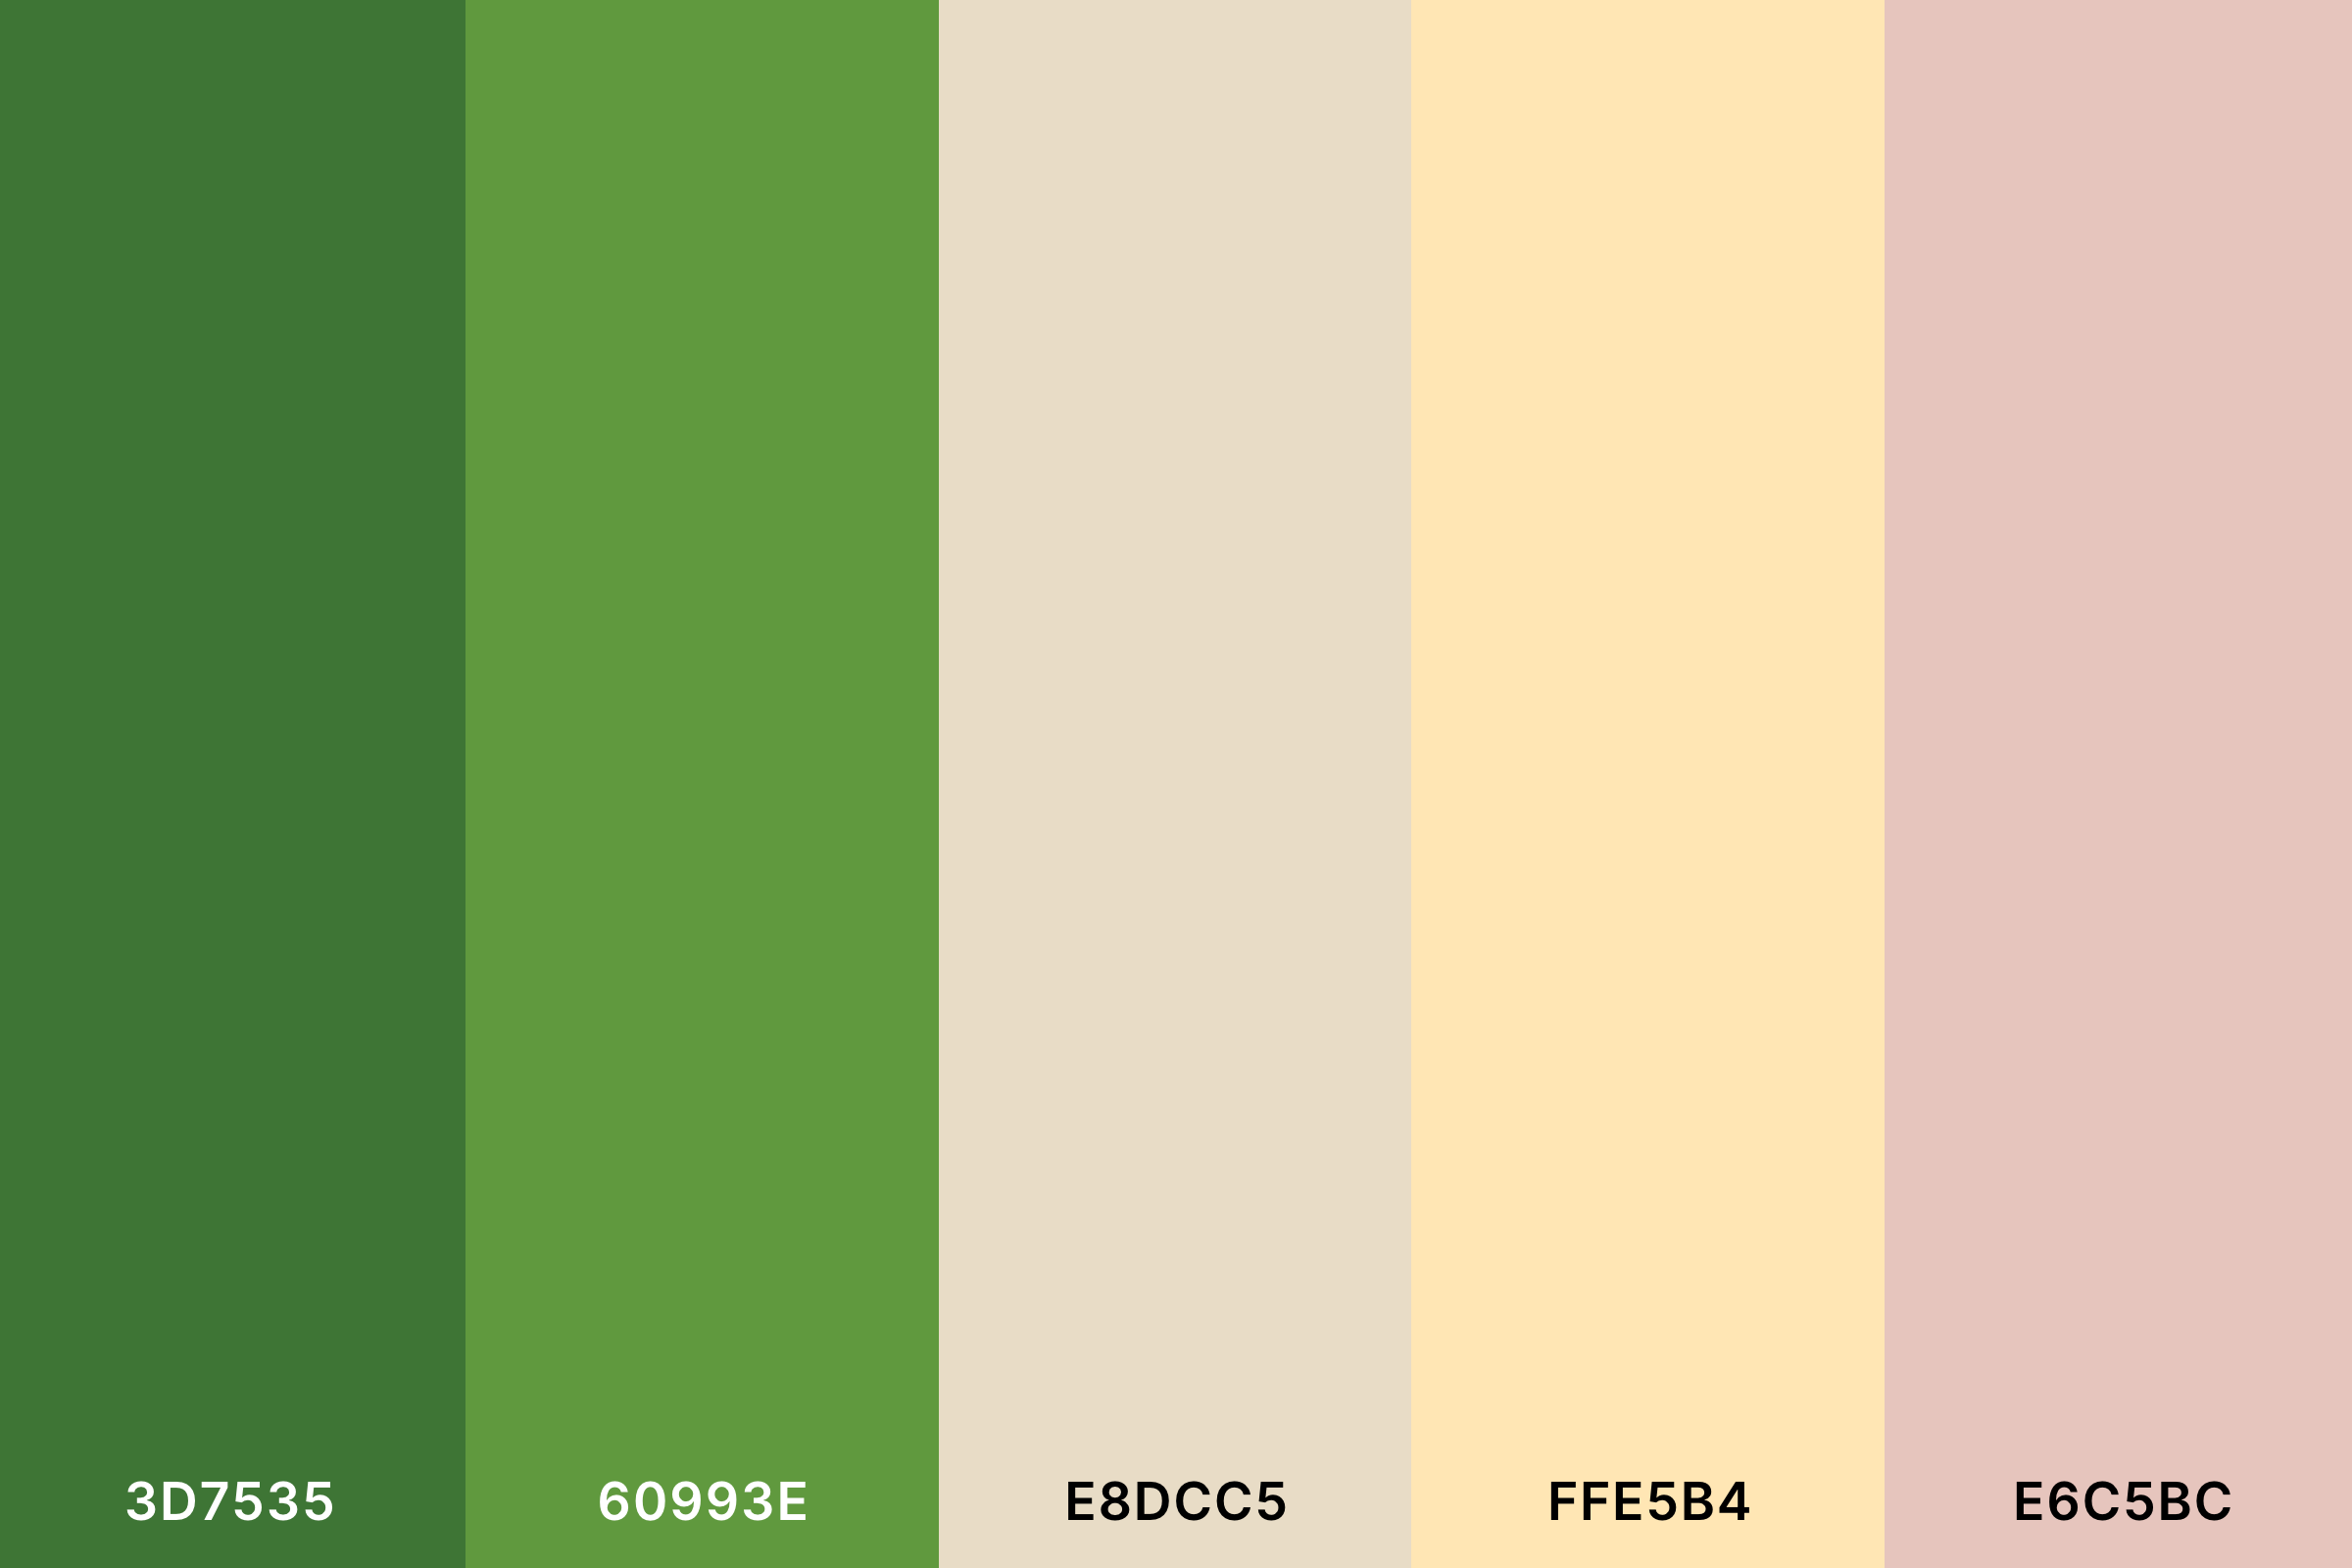 Peach and Green Color Palette with Fern Green (Hex #3D7535) + Asparagus (Hex #60993E) + Pearl (Hex #E8DCC5) + Peach (Hex #FFE5B4) + Pale Dogwood (Hex #E6C5BC) Color Palette with Hex Codes